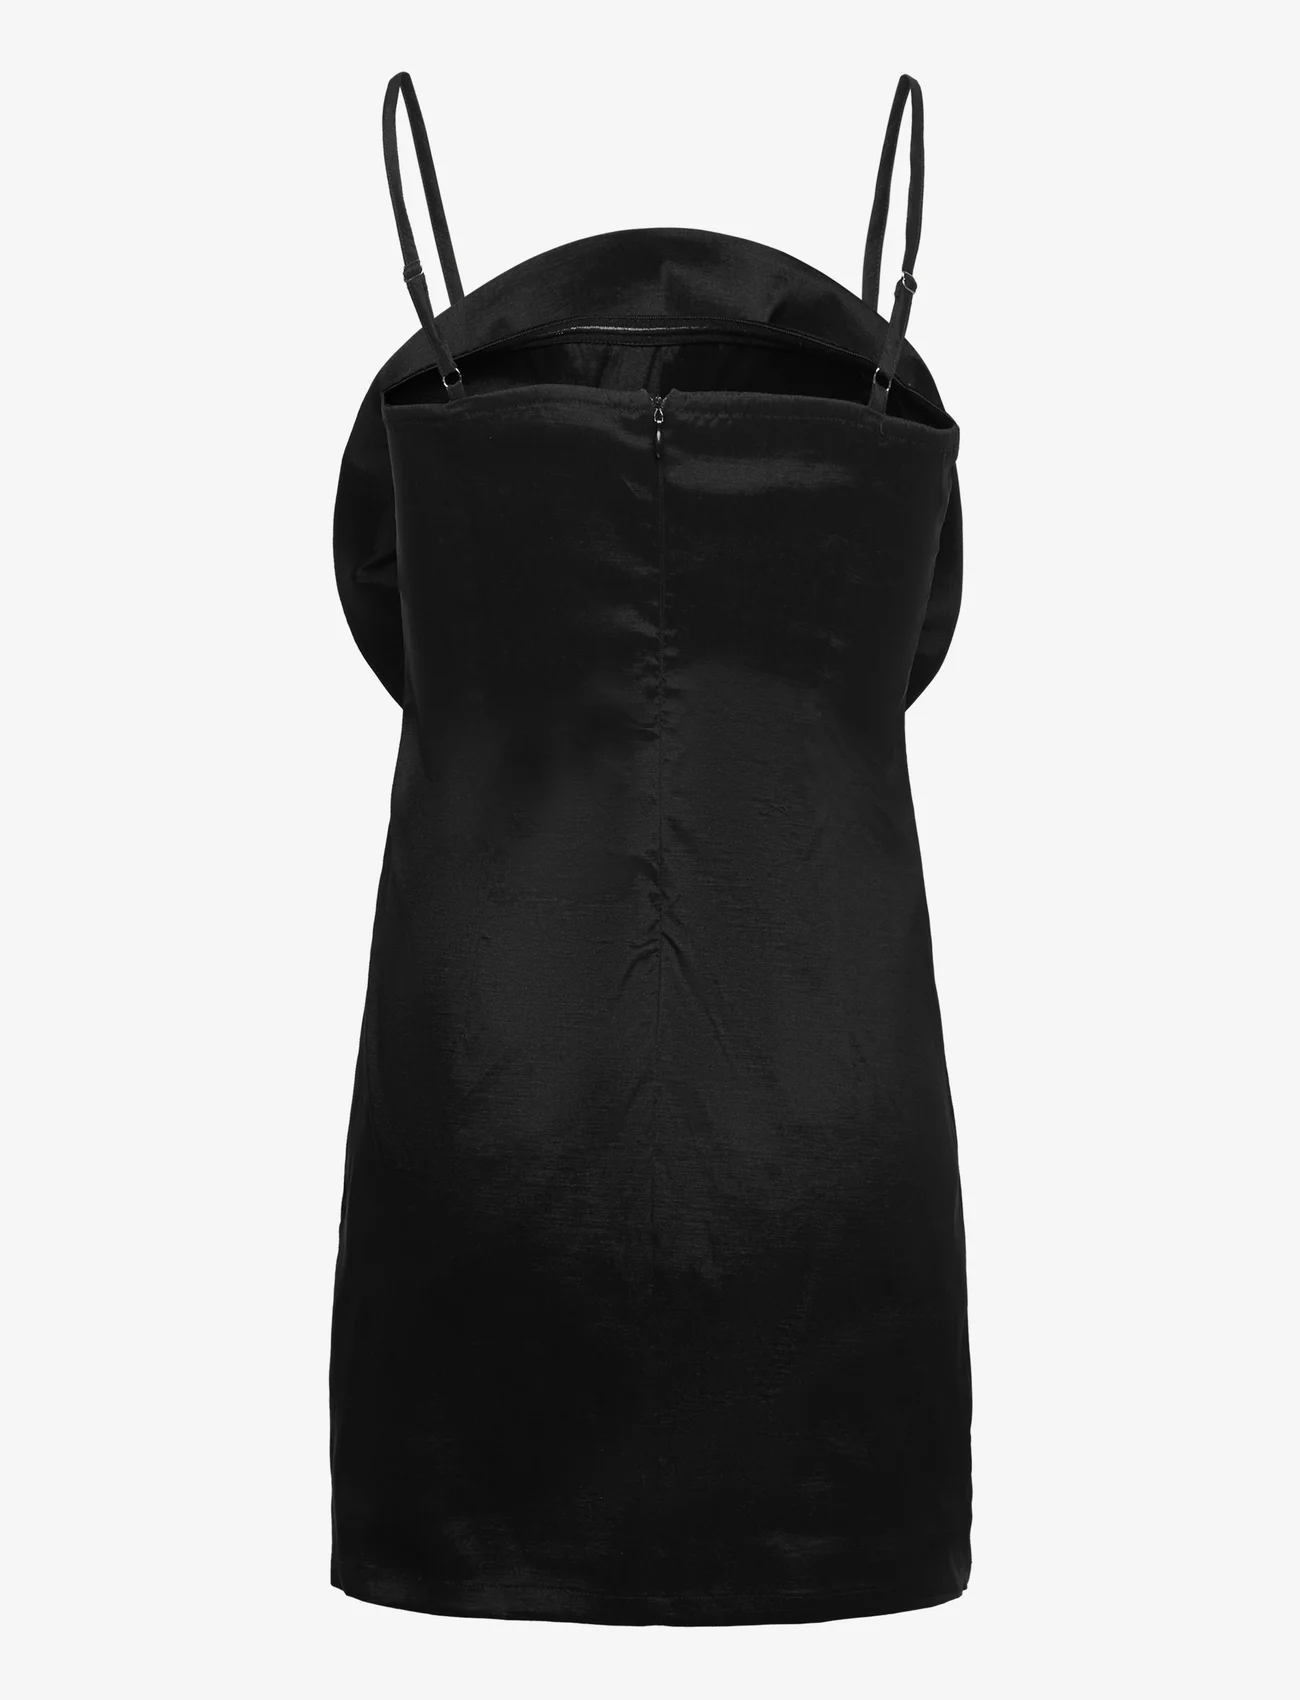 A-View - Charlot dress - peoriided outlet-hindadega - black - 1